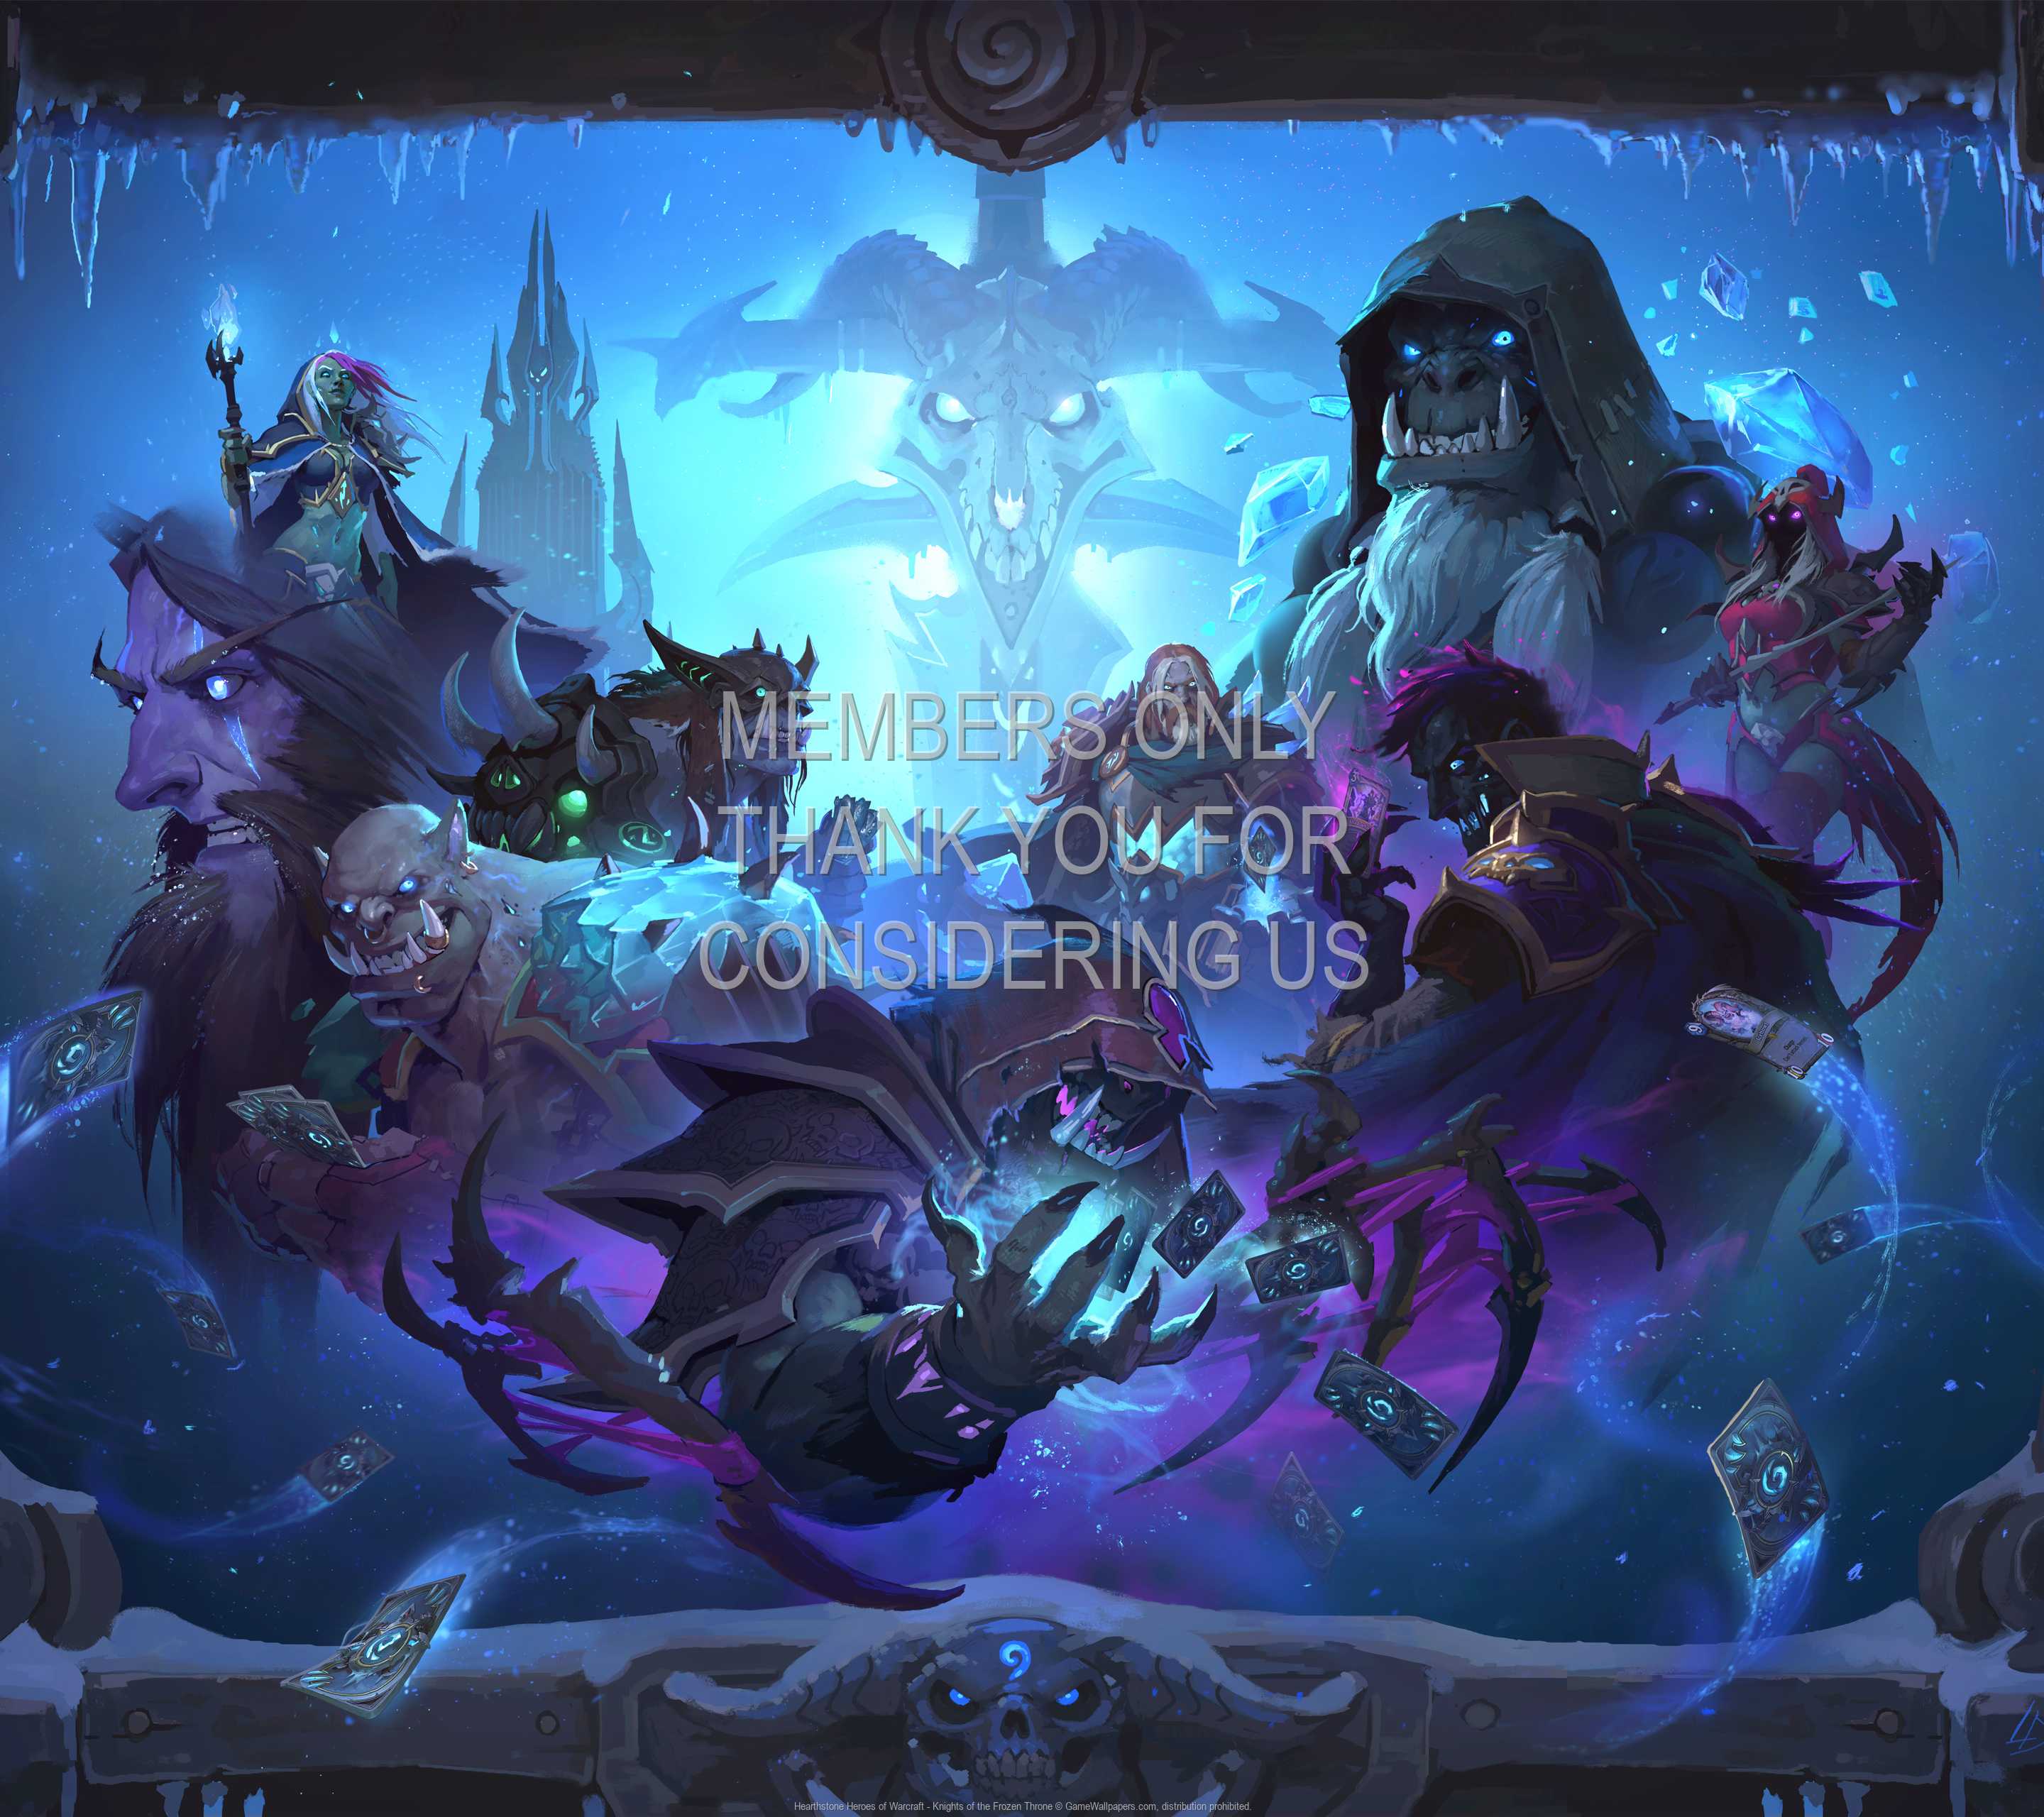 Hearthstone: Heroes of Warcraft - Knights of the Frozen Throne 1440p Horizontal Mobiele achtergrond 04